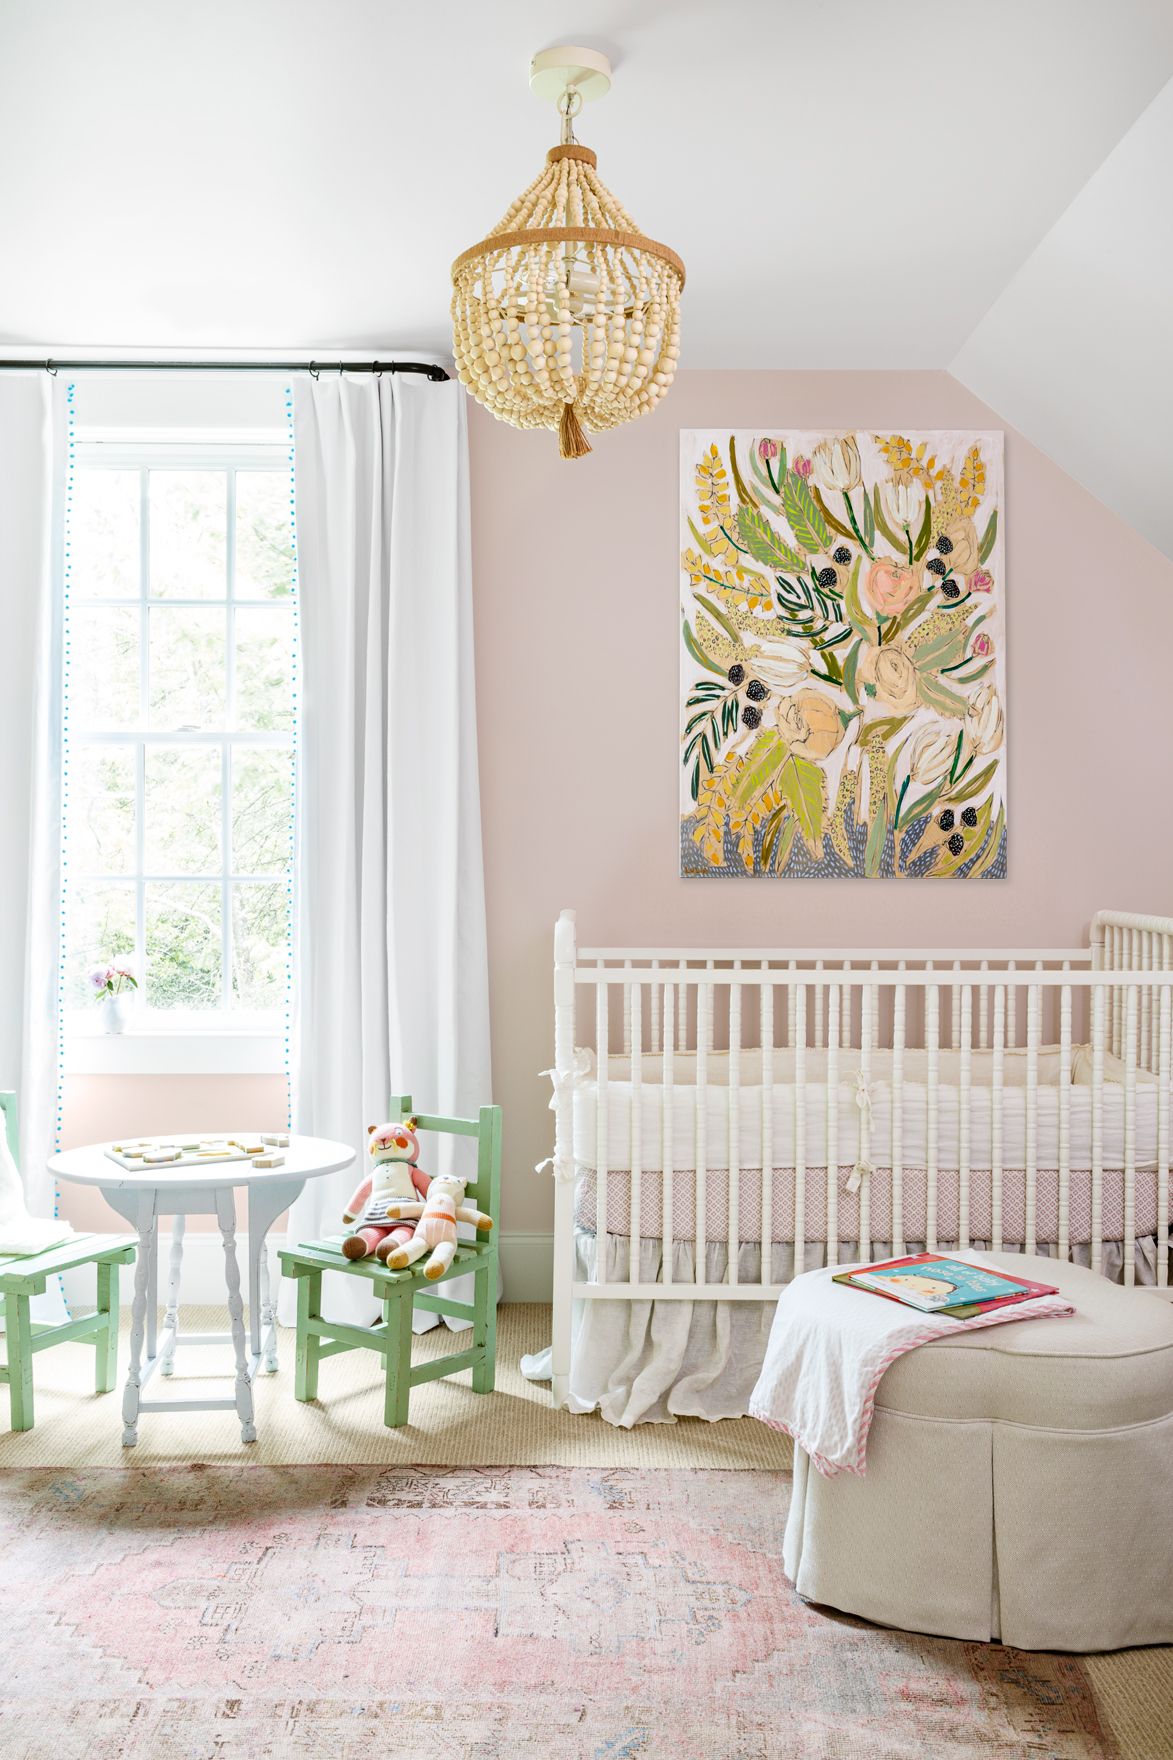 simple baby room